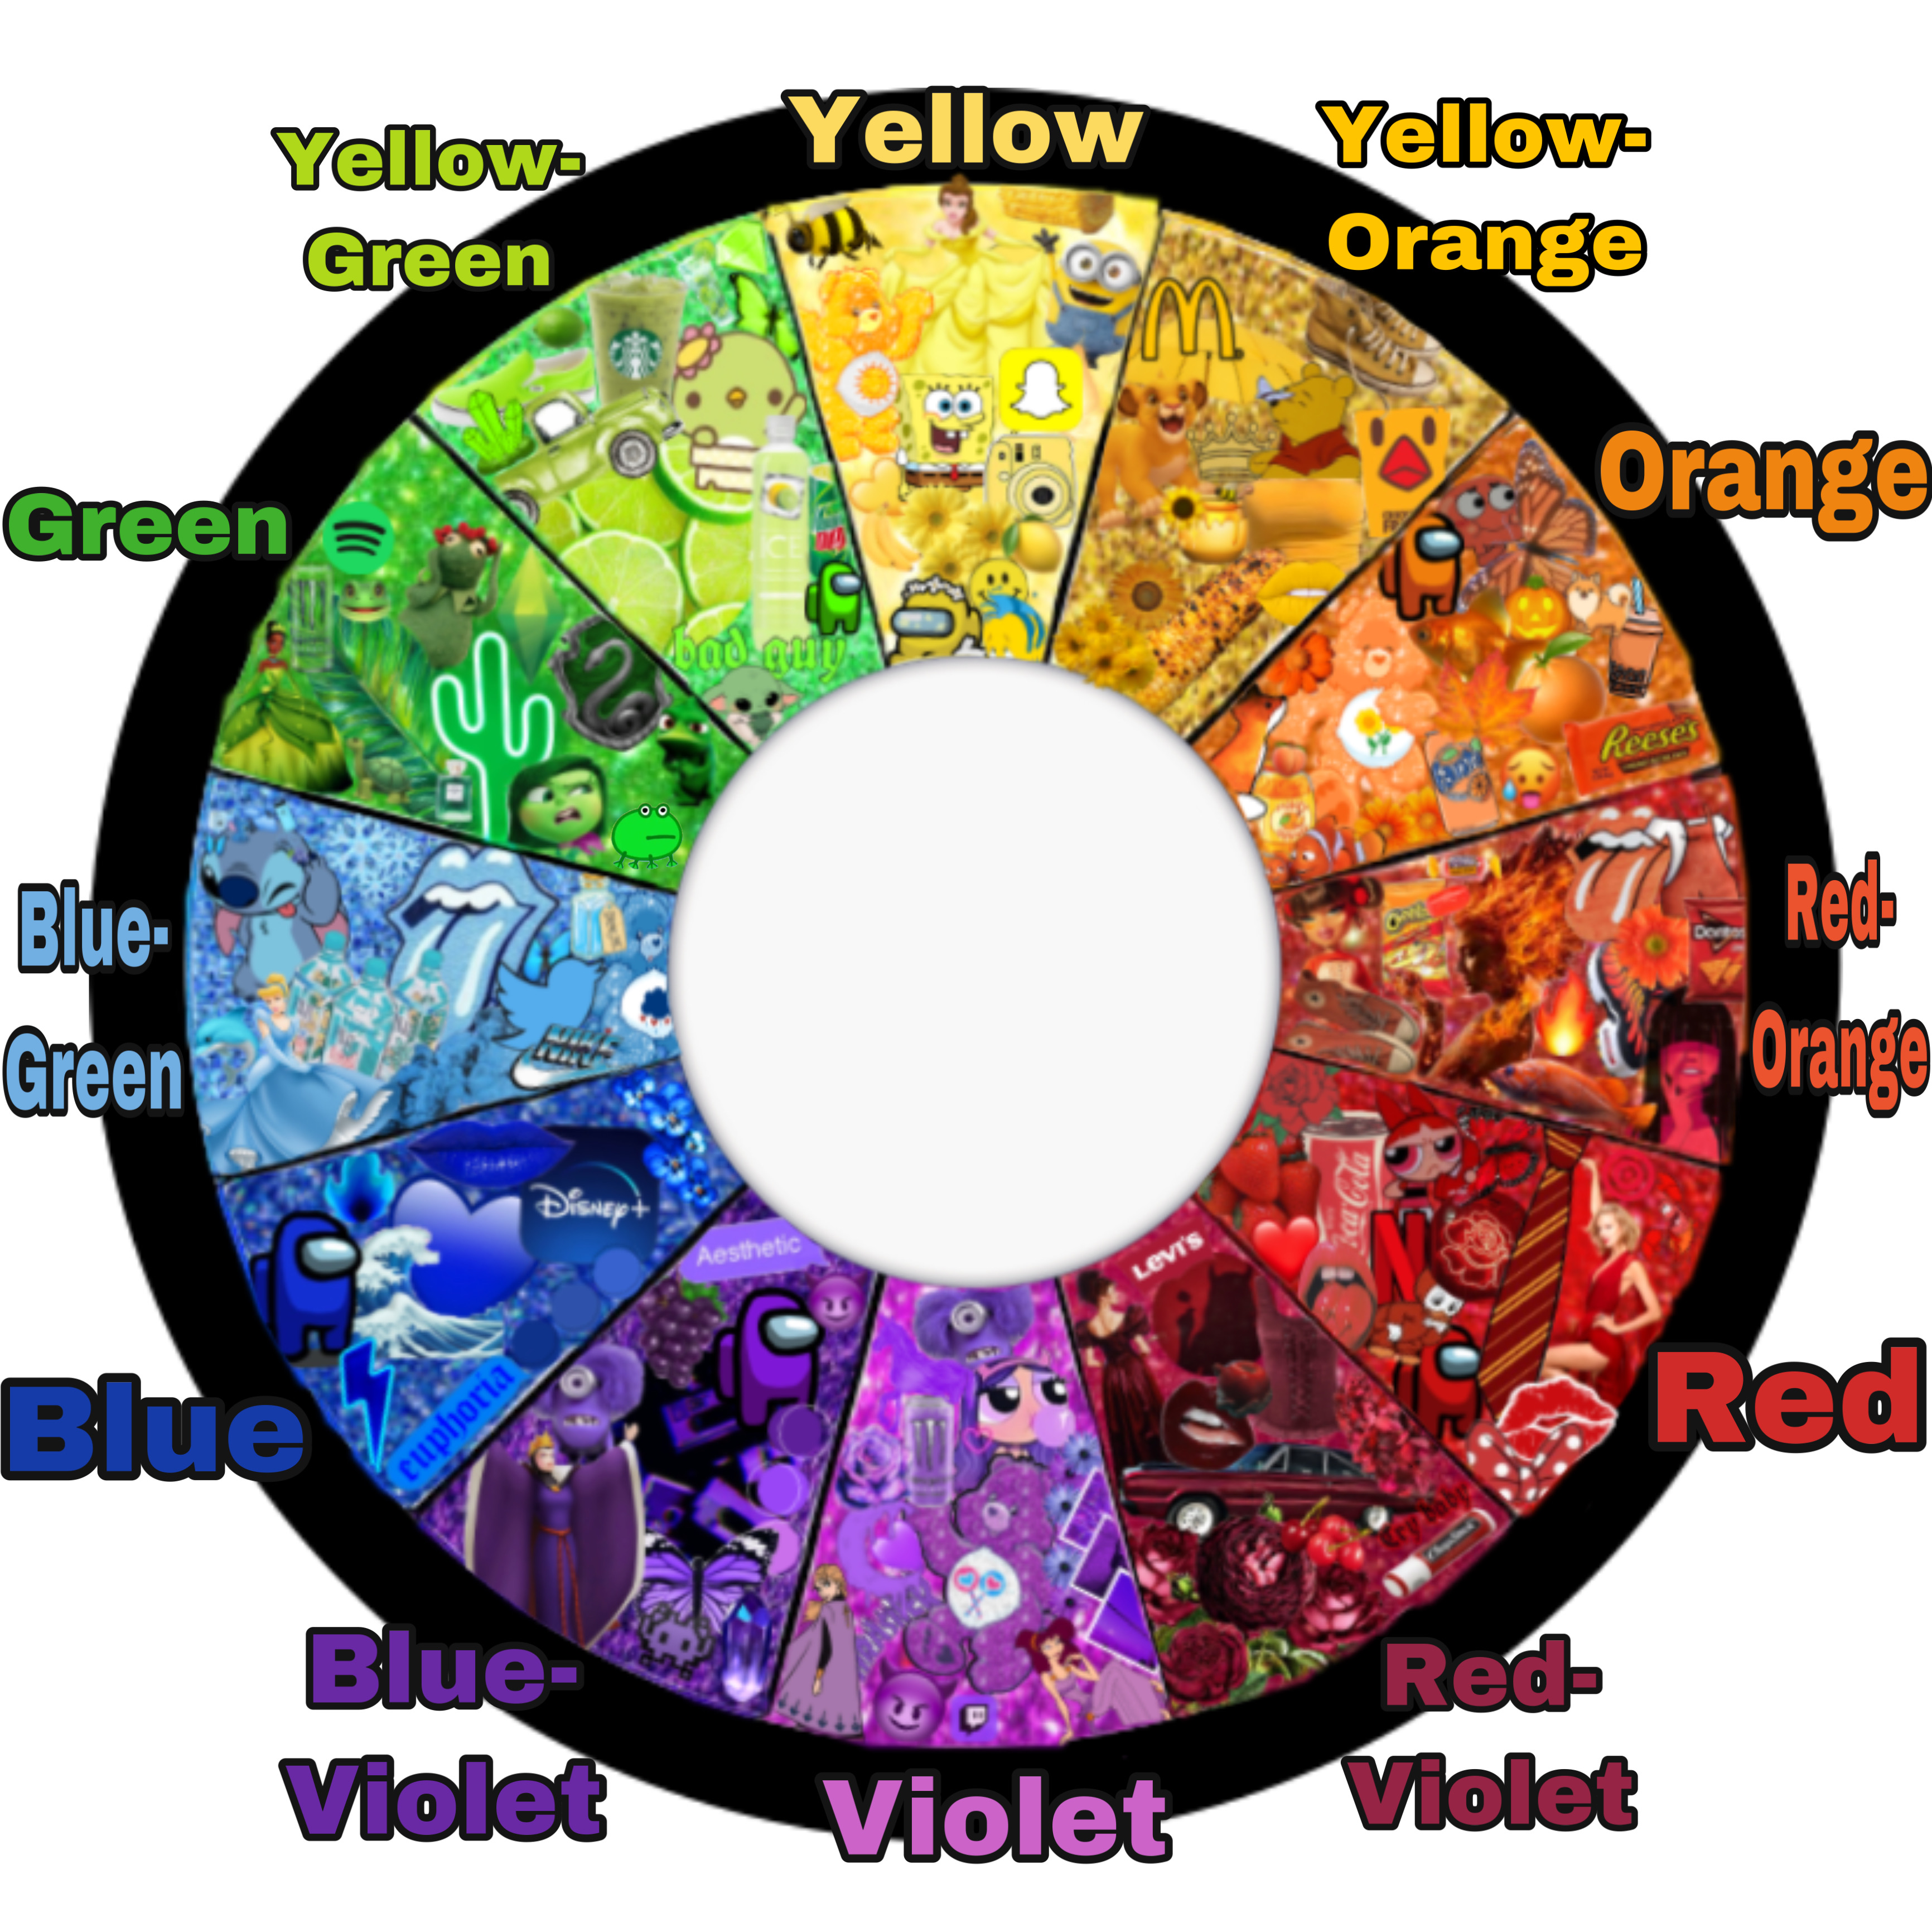 #colorwheel #labeled#interesting #colorful#stickers#red#orange#yellow#green#blue#violet#bright